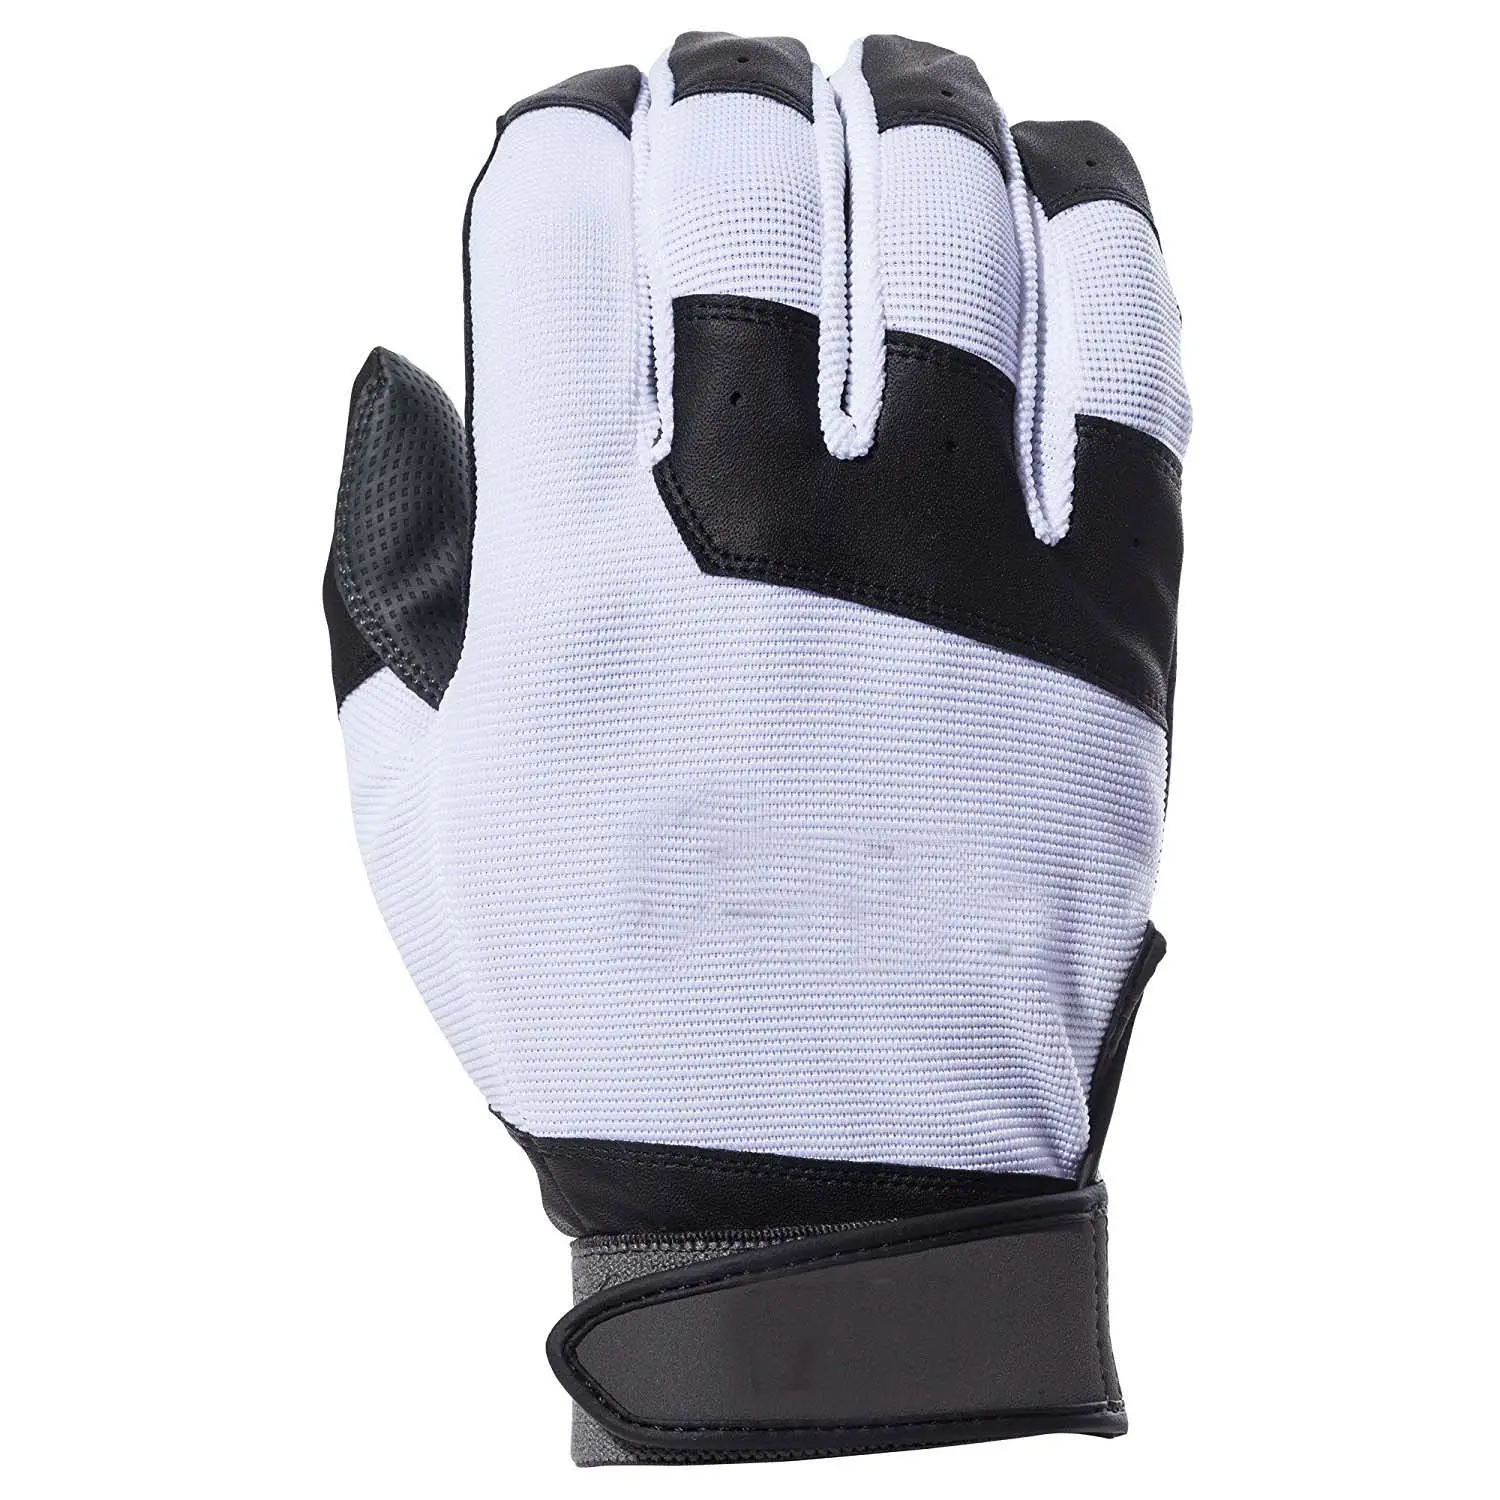 Wholesale Baseball Batting Gloves With Customization Genuine Leather new design adult American baseball batting gloves